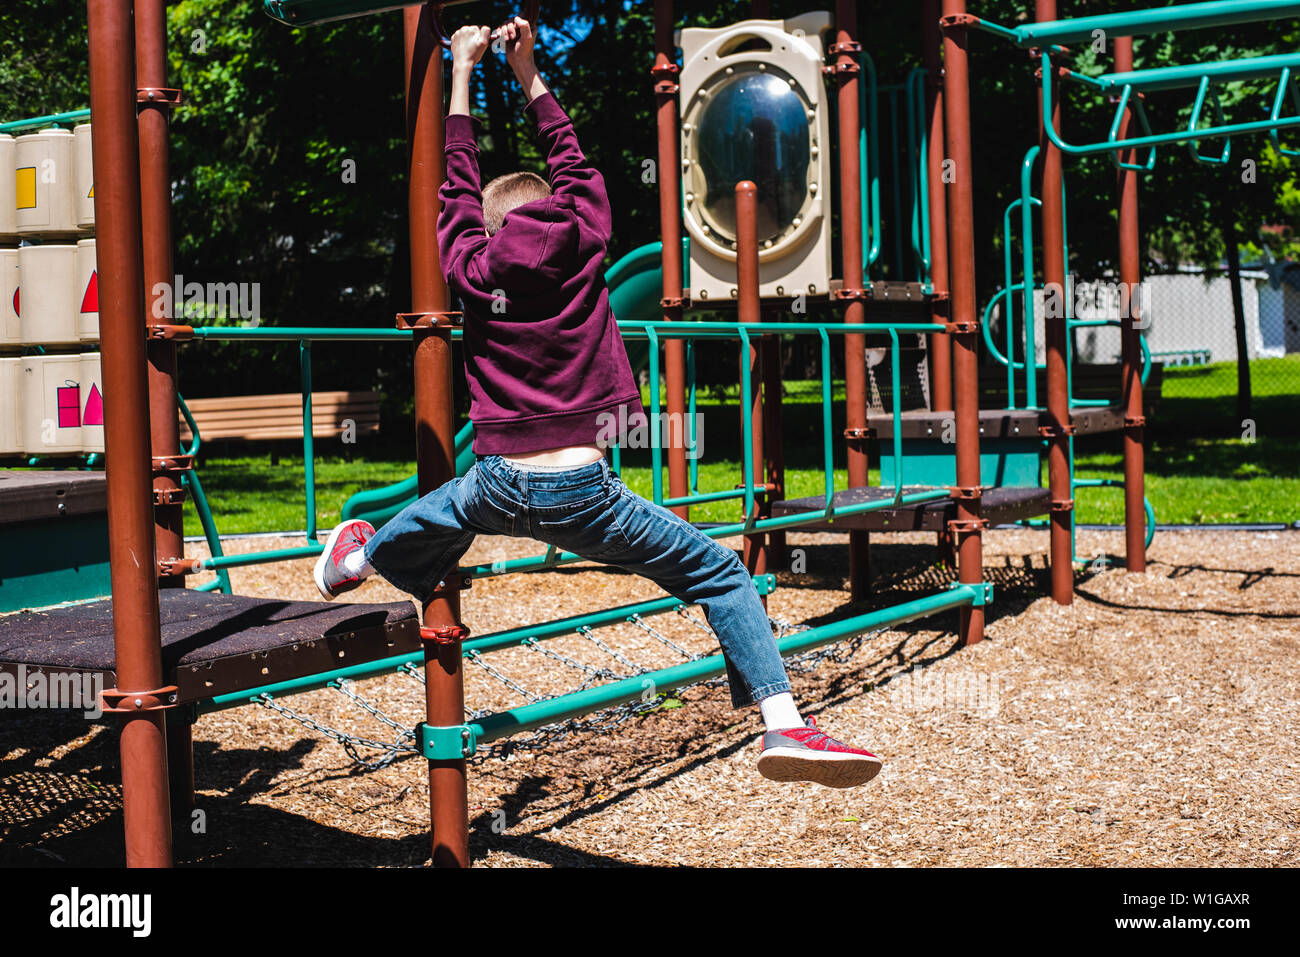 A boy slides on a zip line on a playground on a warm summer day. Stock Photo